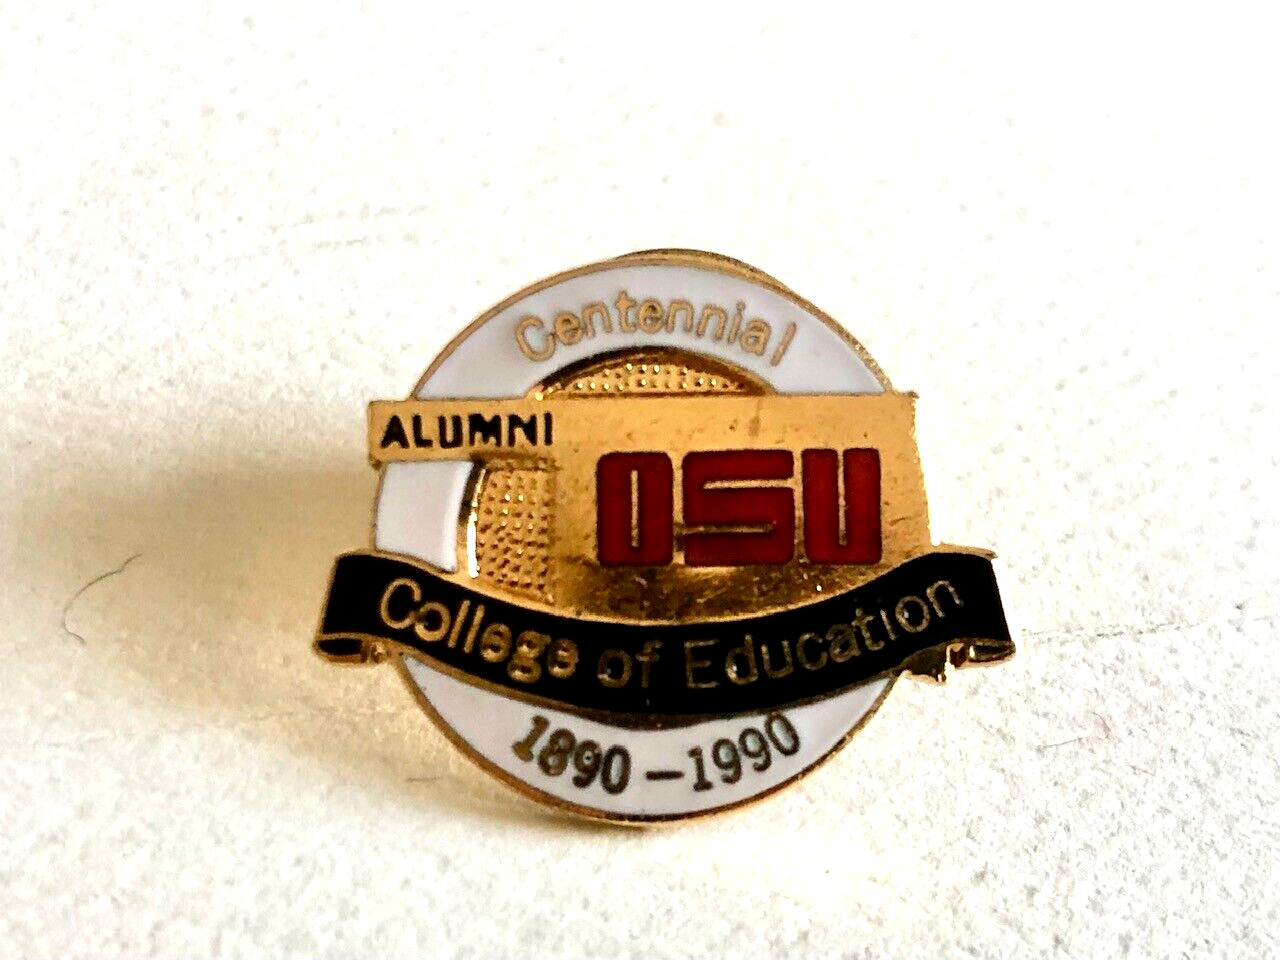 Vintage 1890-1990 OSU College of Education Centennial Pin-FREE Shipping